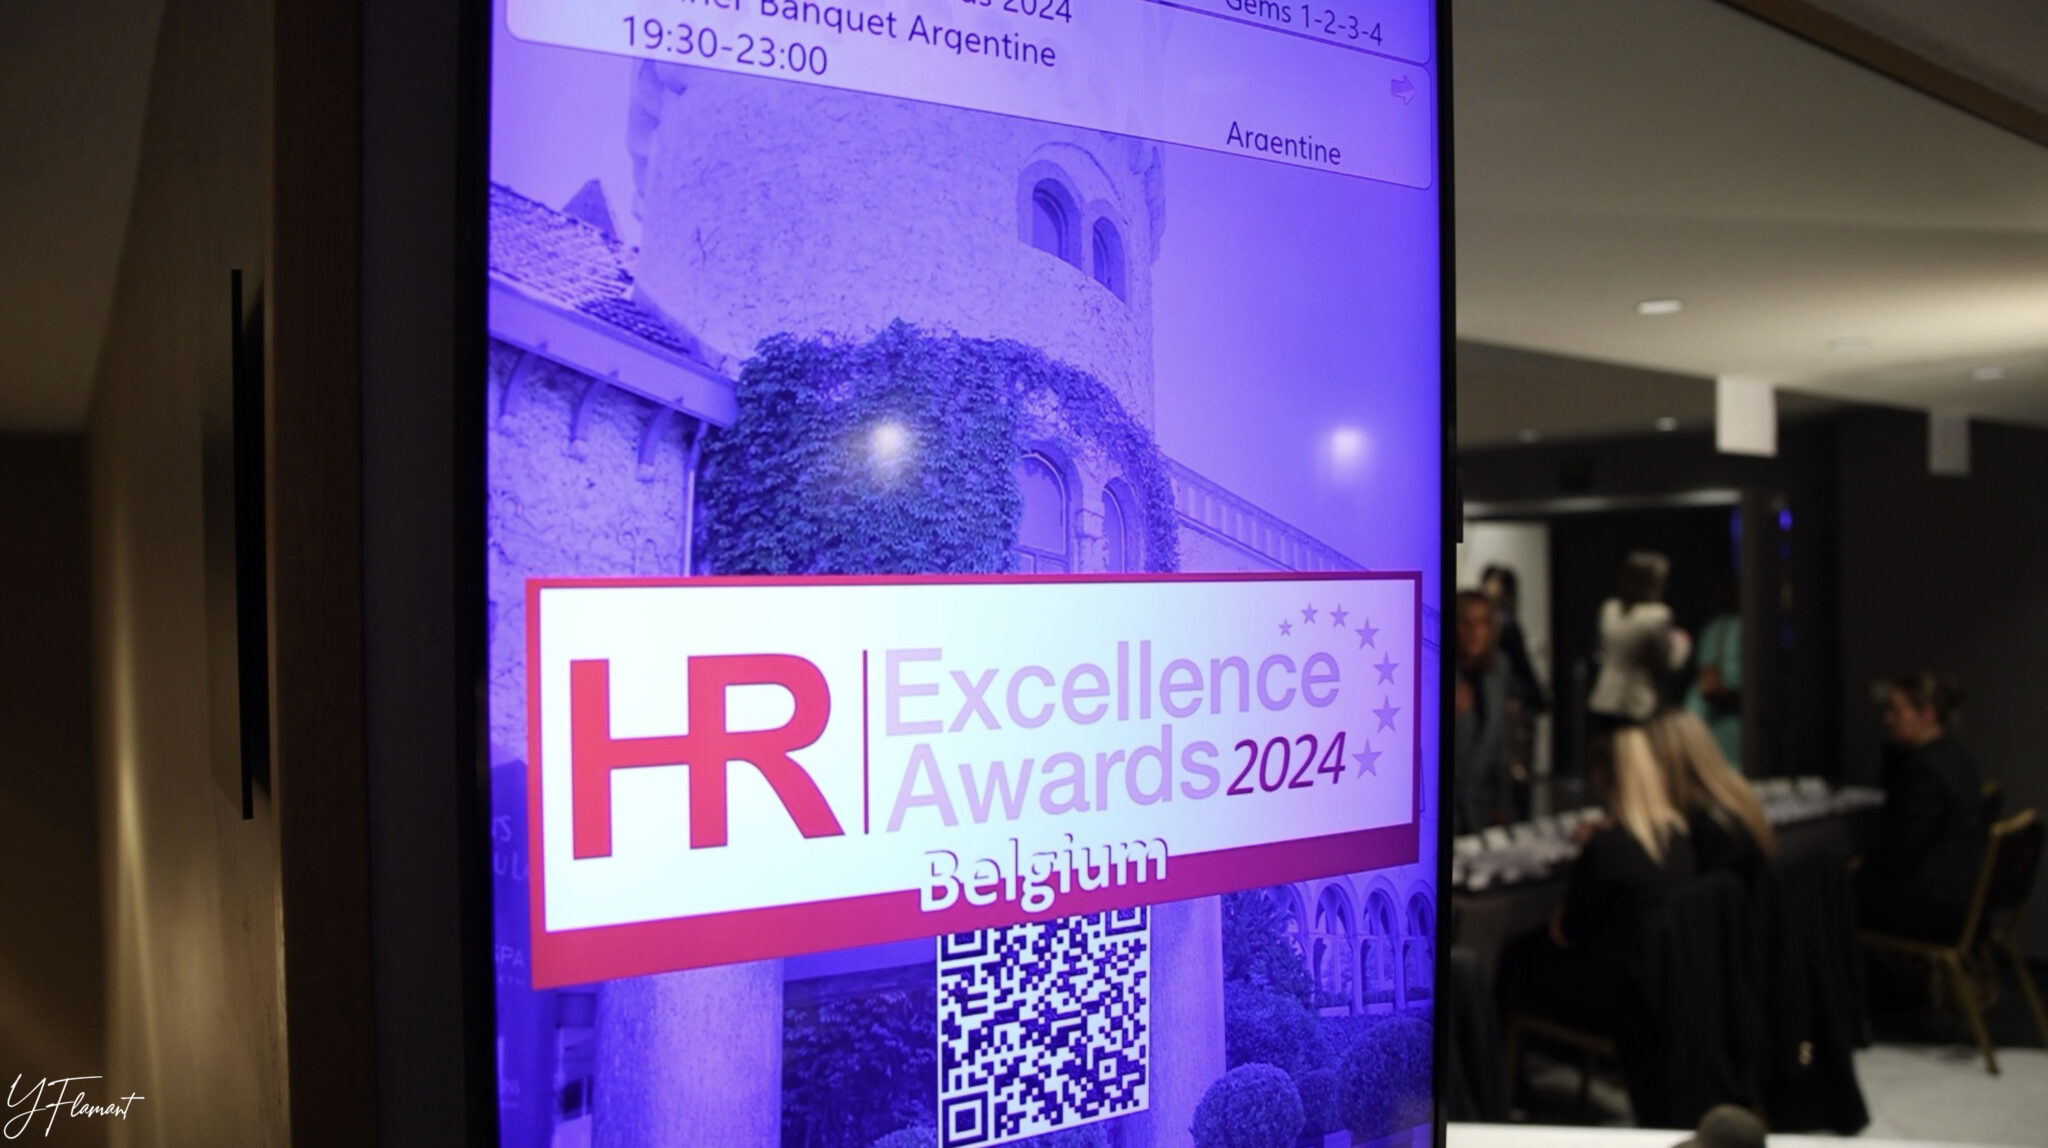 3de HR Excellence Award voor Quality Training